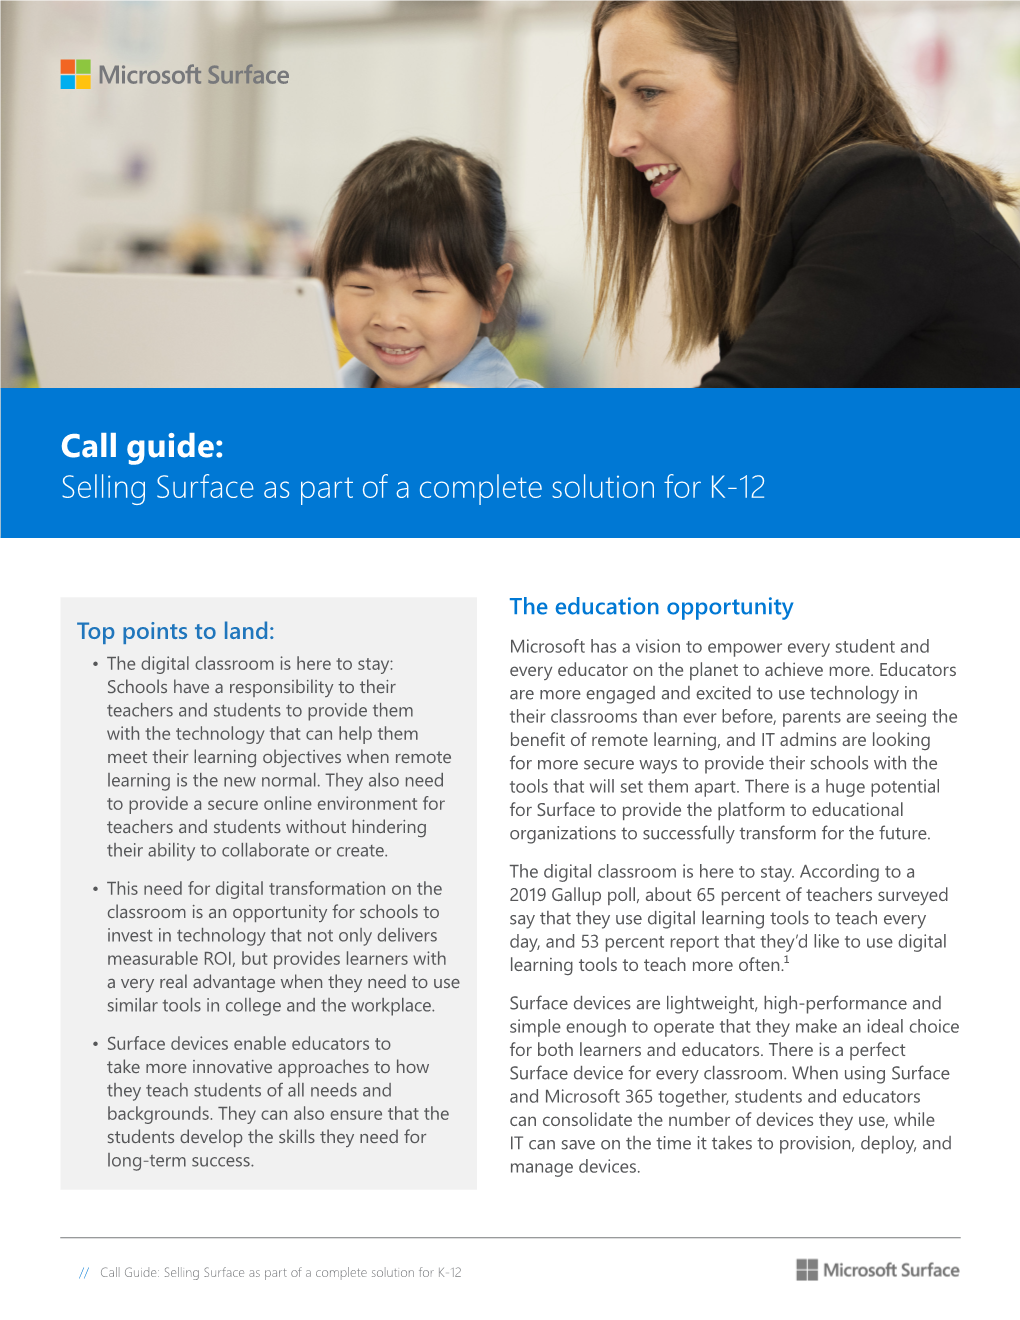 Call Guide: Selling Surface As Part of a Complete Solution for K-12